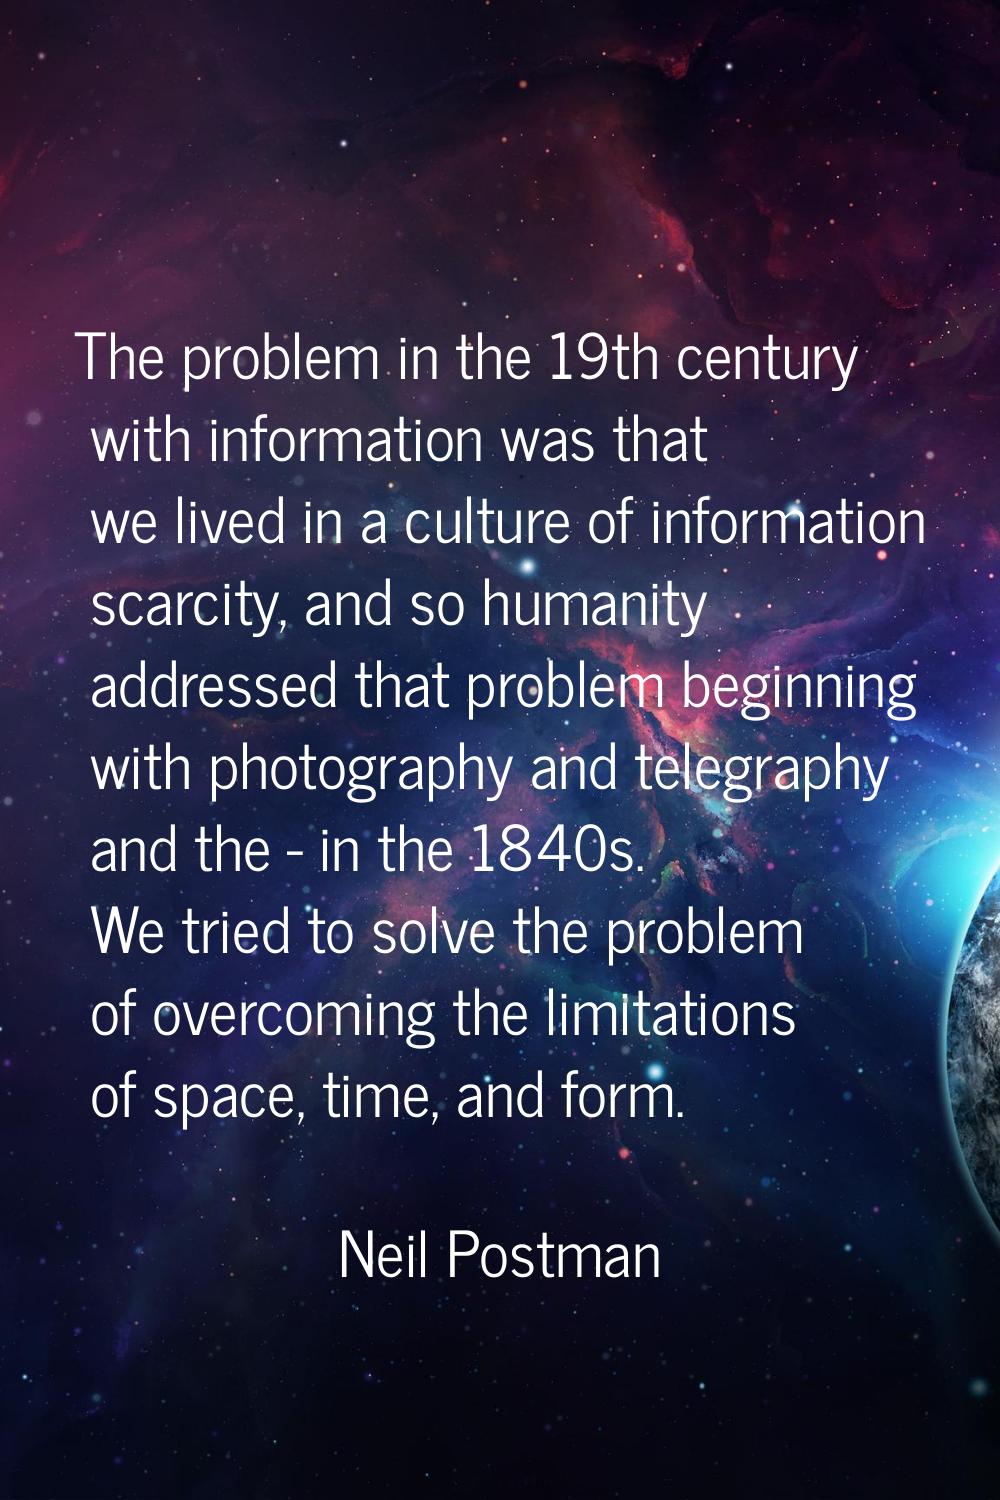 The problem in the 19th century with information was that we lived in a culture of information scar